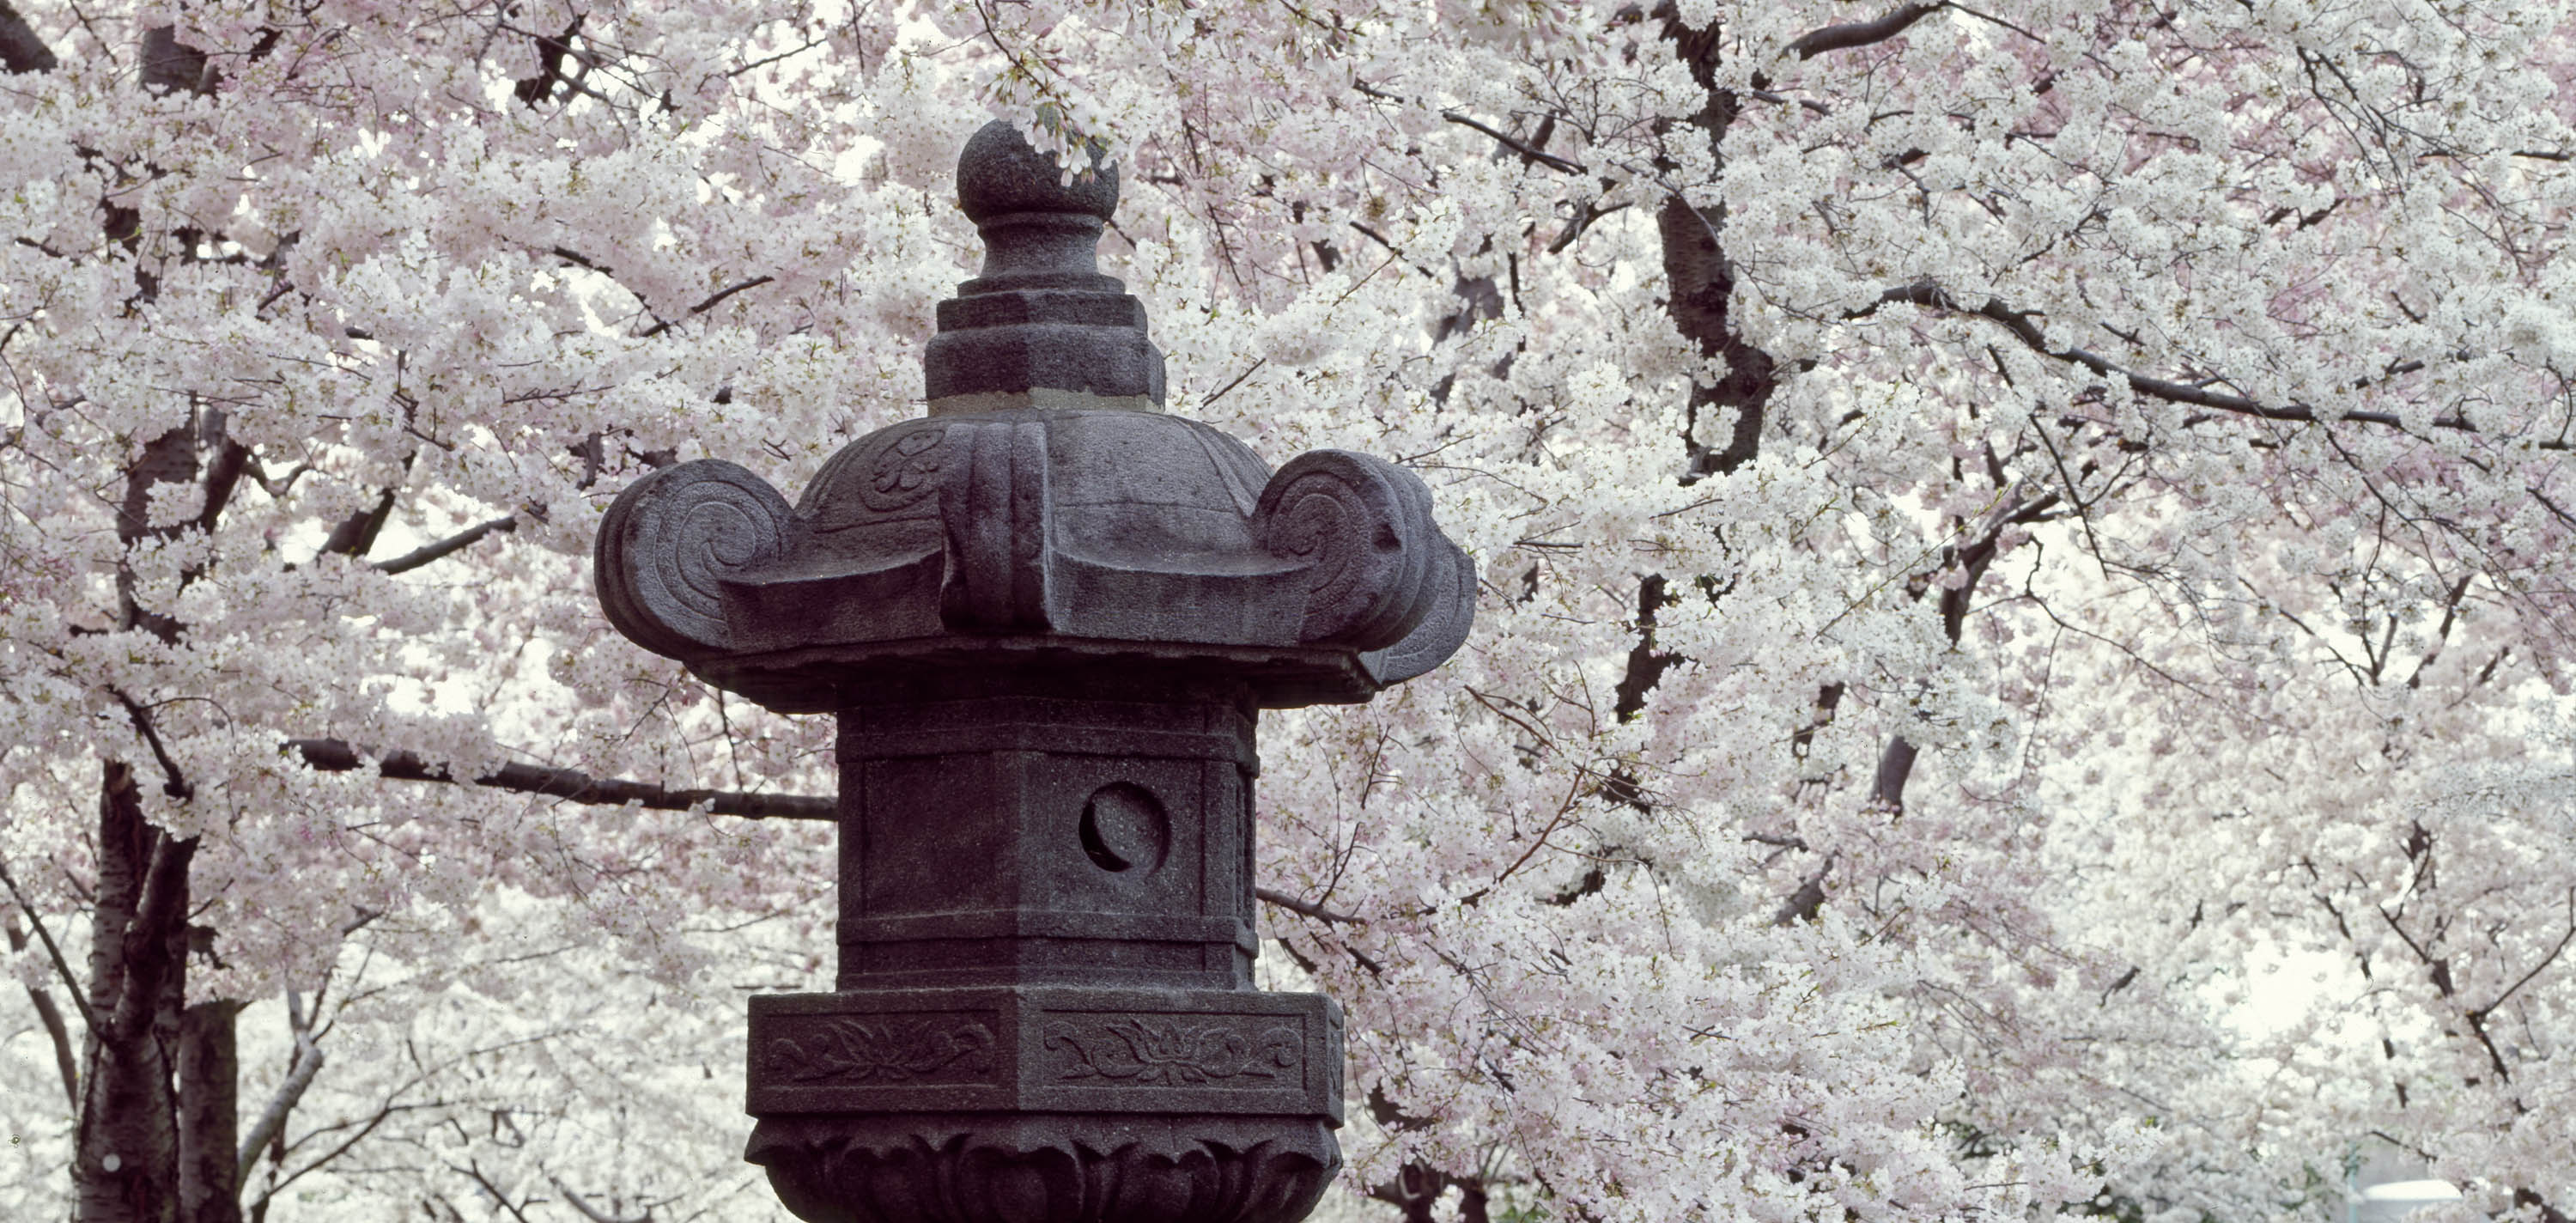 Cherry trees along the Tidal Basin with Japanese Lantern placed in the park in 1954. Washington, D.C.